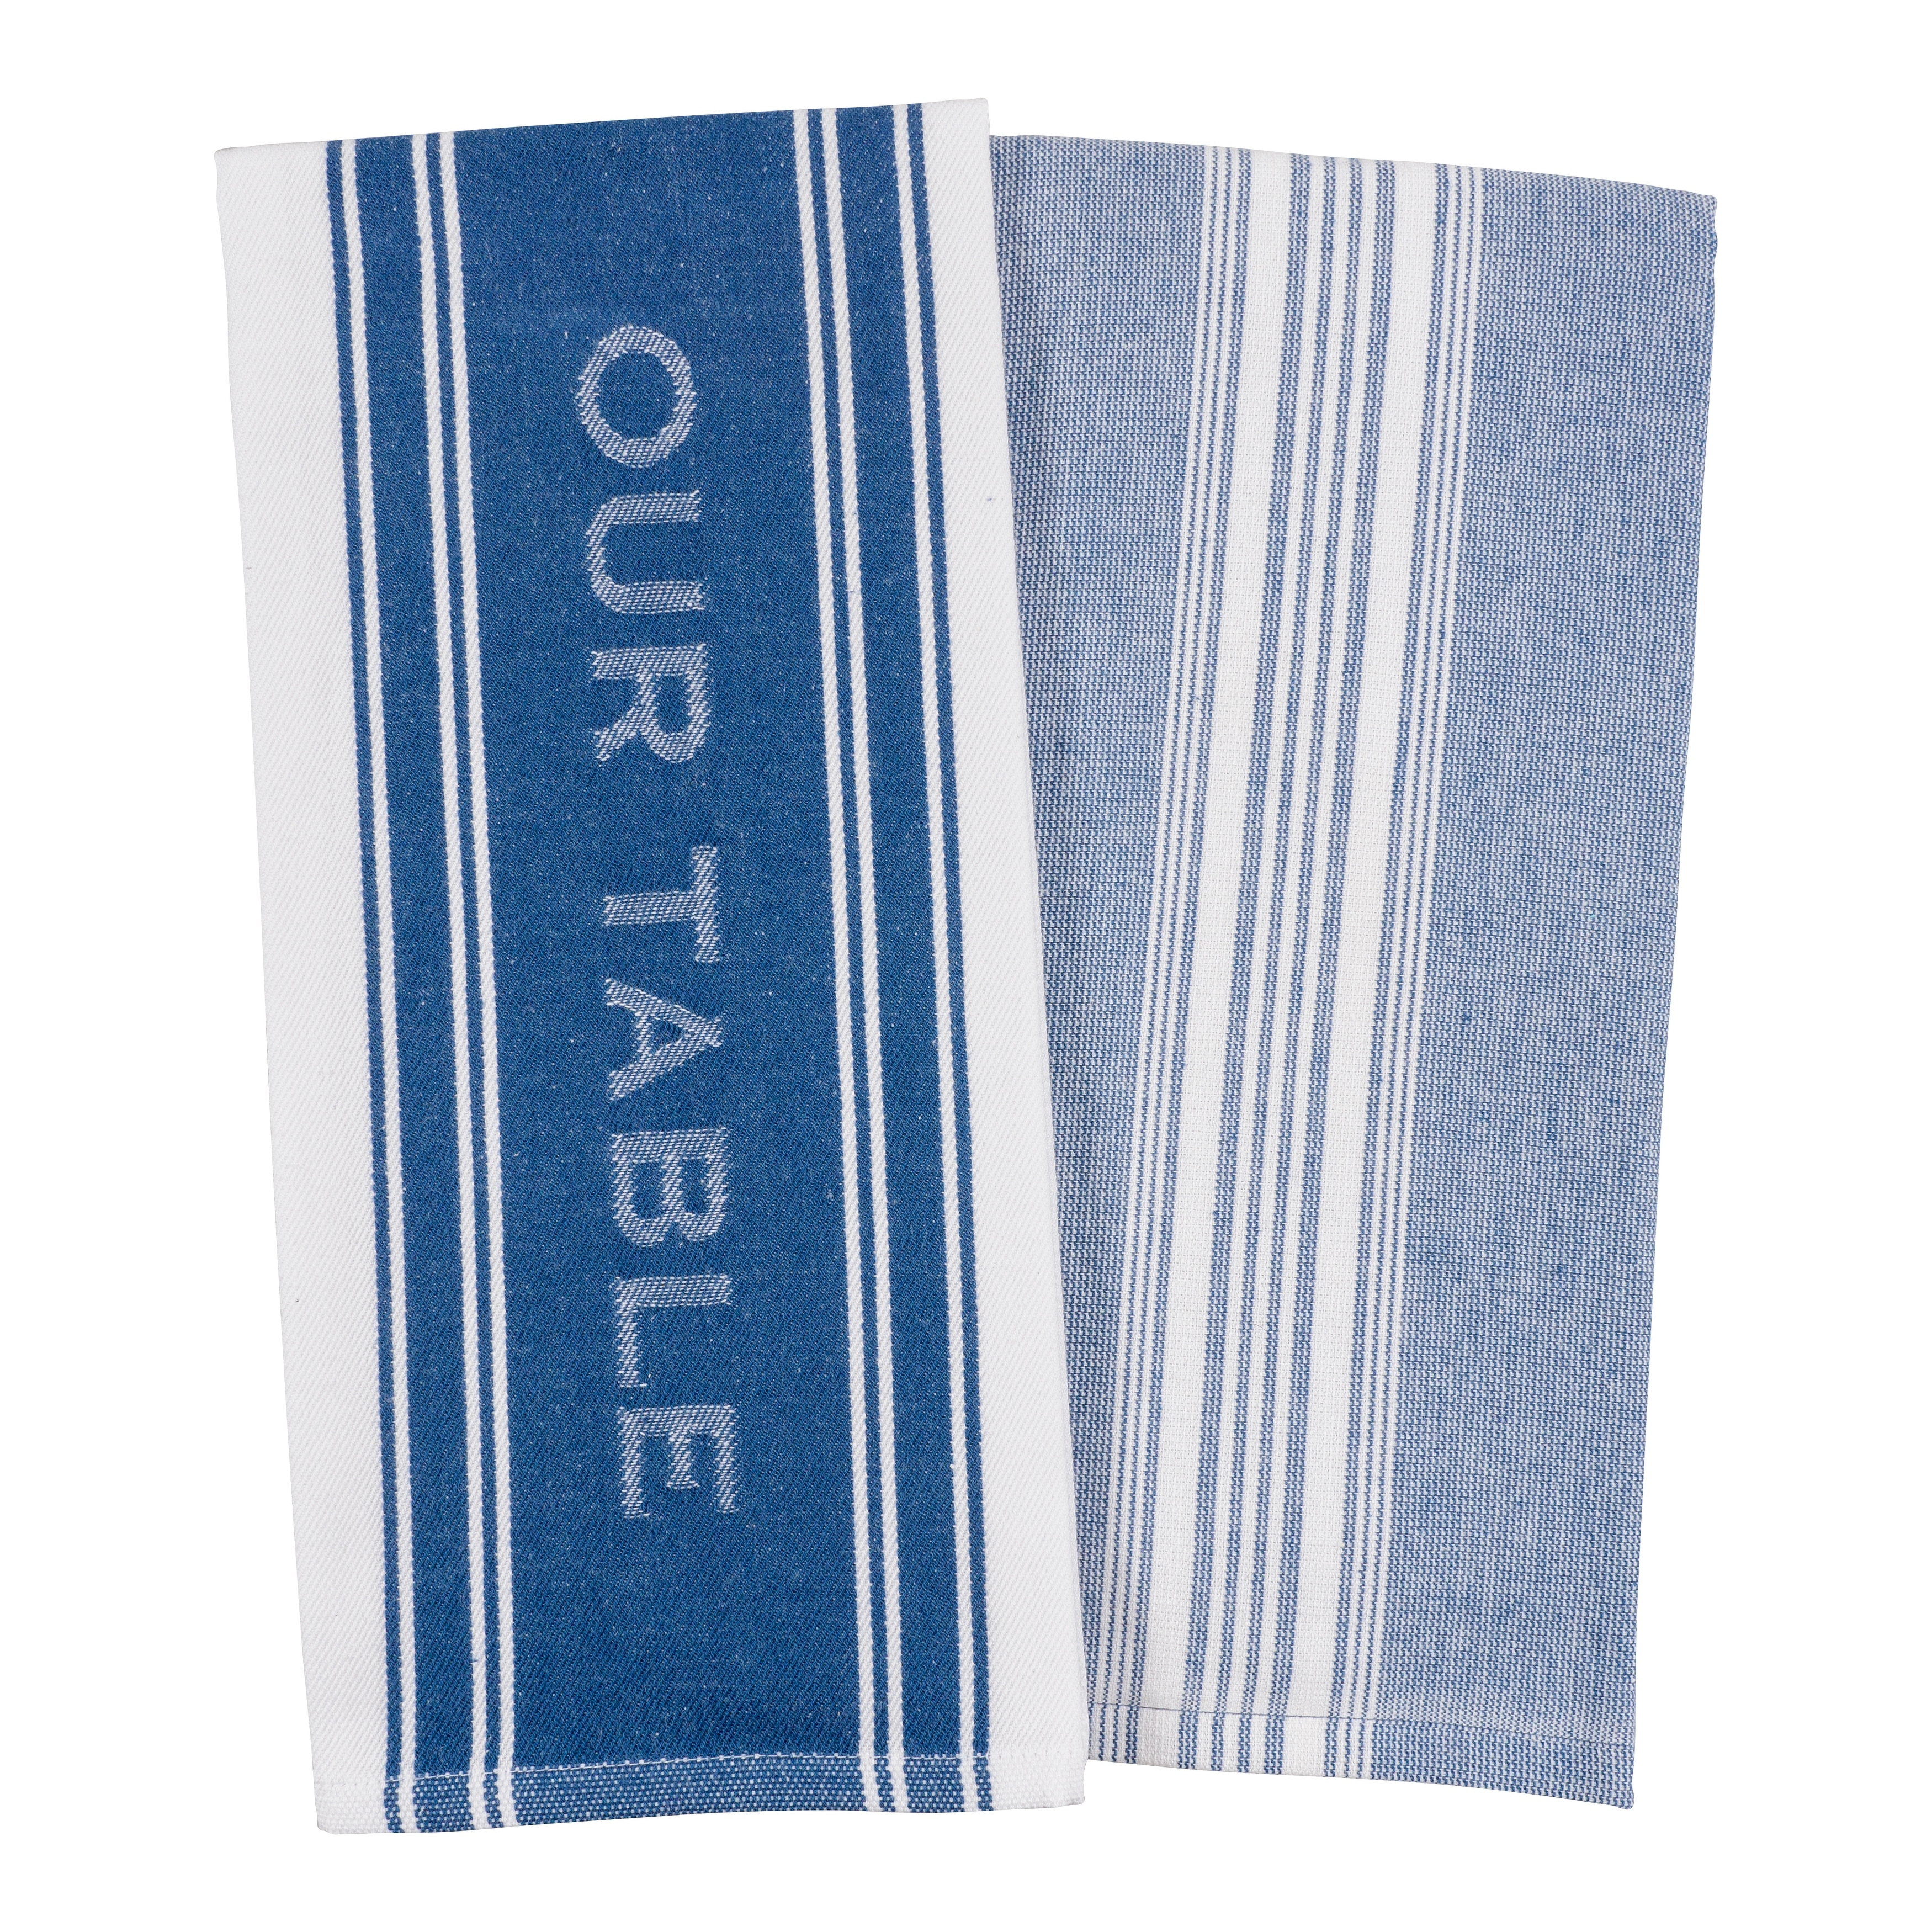 https://ak1.ostkcdn.com/images/products/is/images/direct/9dcc9ee80afd3189c18b31c92cd912741c5a888a/Bed-Bath-and-Beyond-Our-Table-Turkish-Kitchen-Towels---Set-of-2.jpg